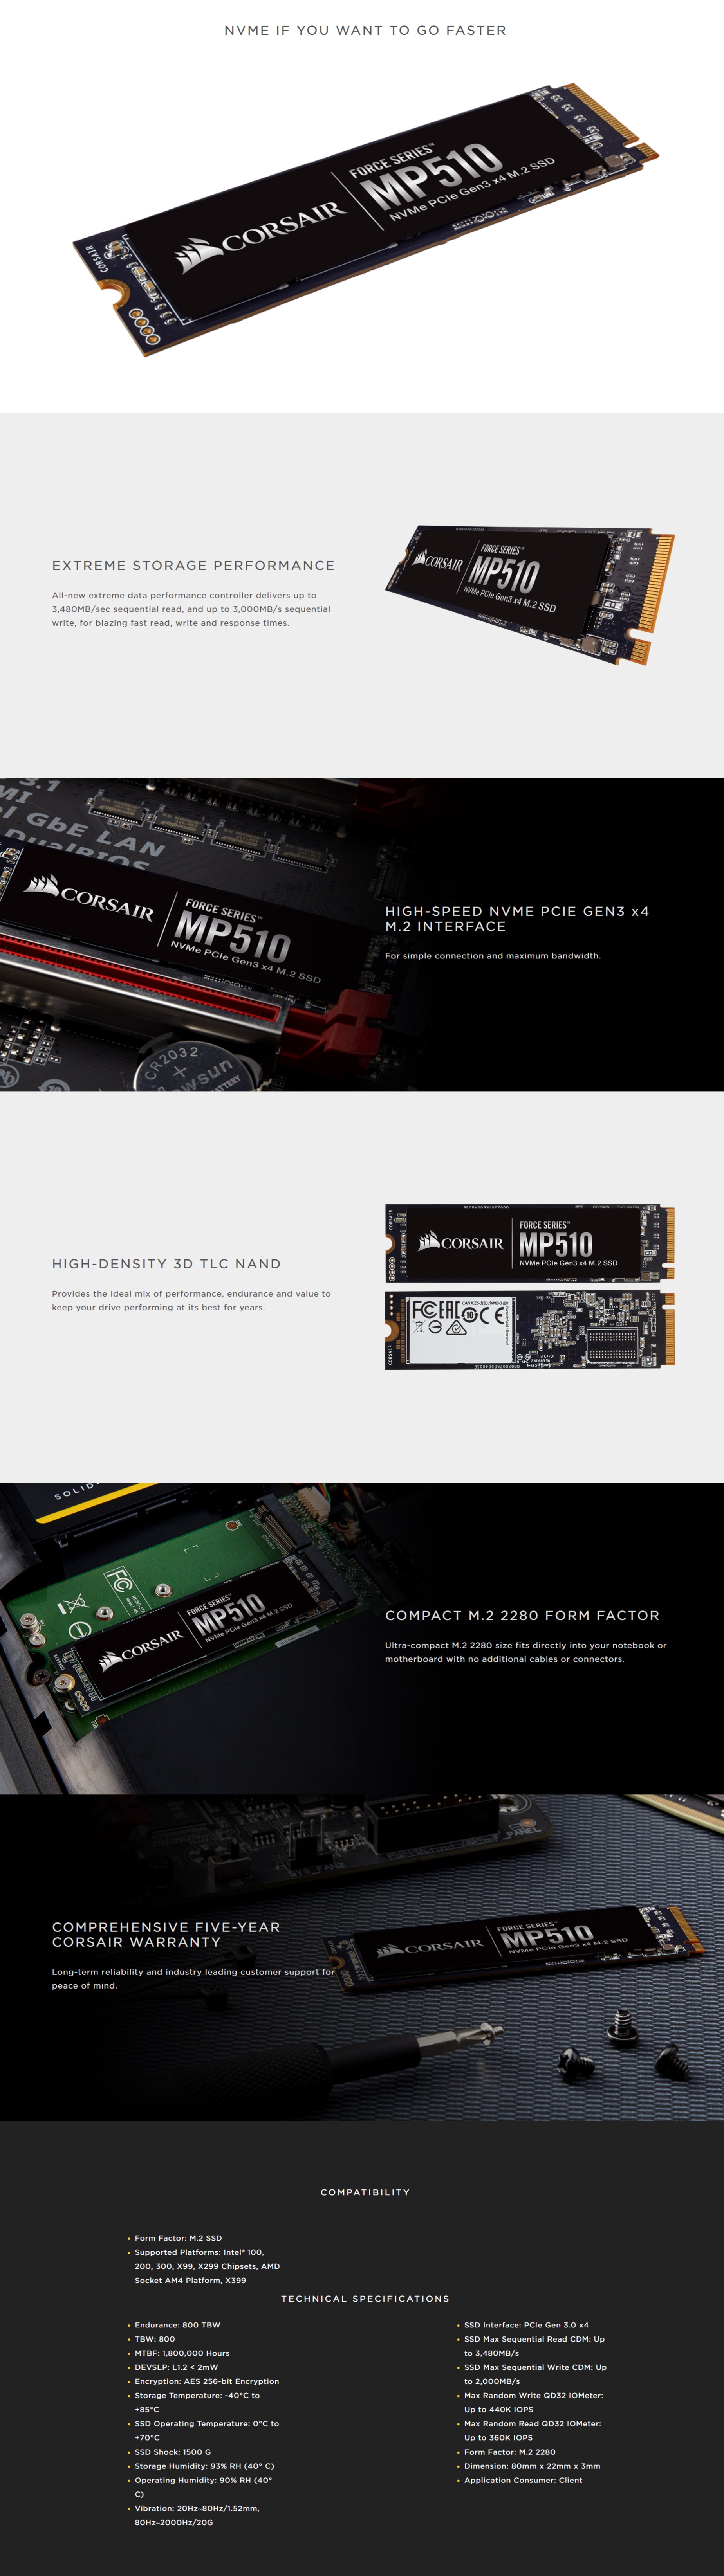 A large marketing image providing additional information about the product Corsair Force MP510 PCIe Gen3 NVMe M.2 SSD - 480GB - Additional alt info not provided